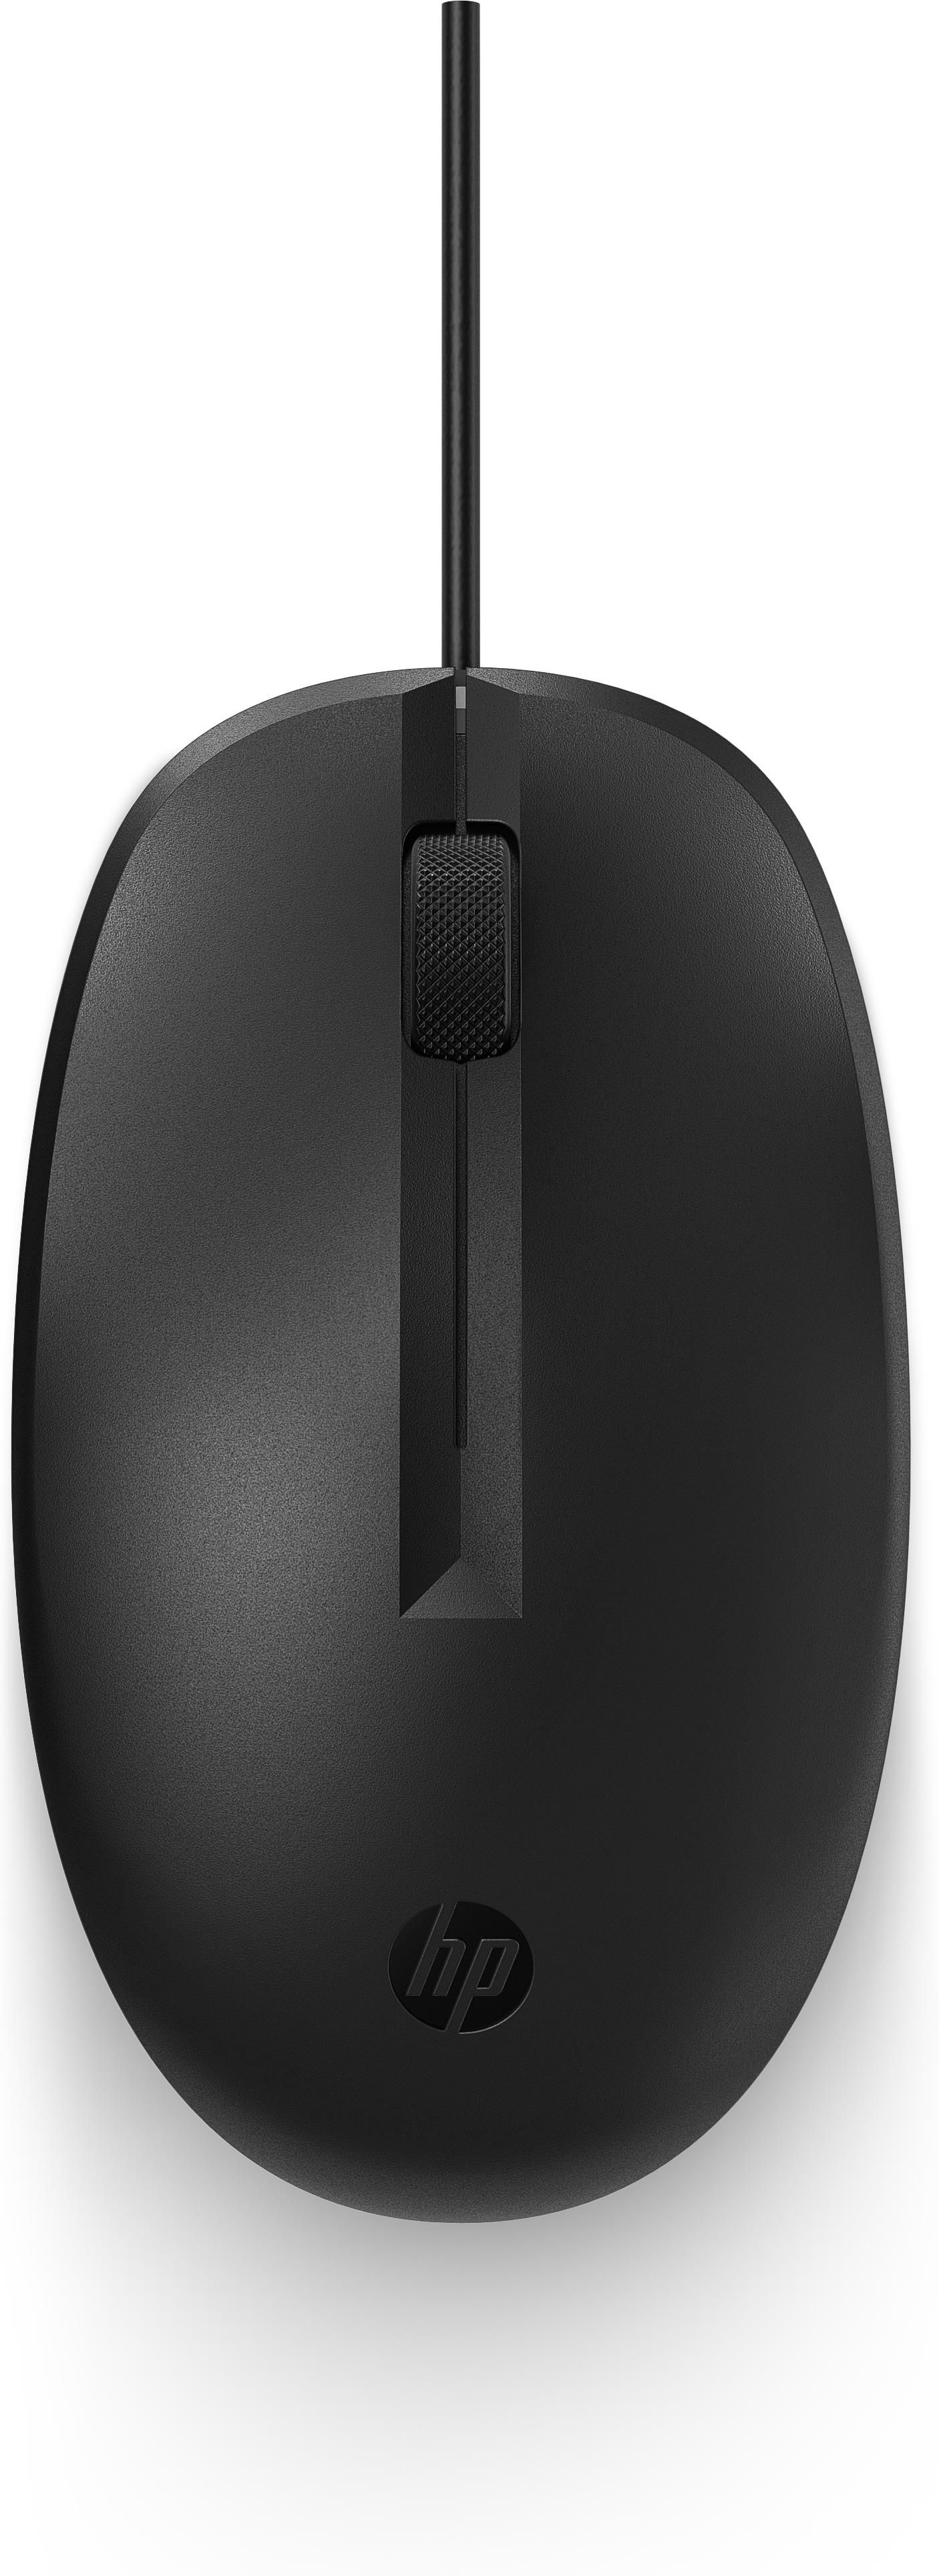 HP Mouse 128 Laser